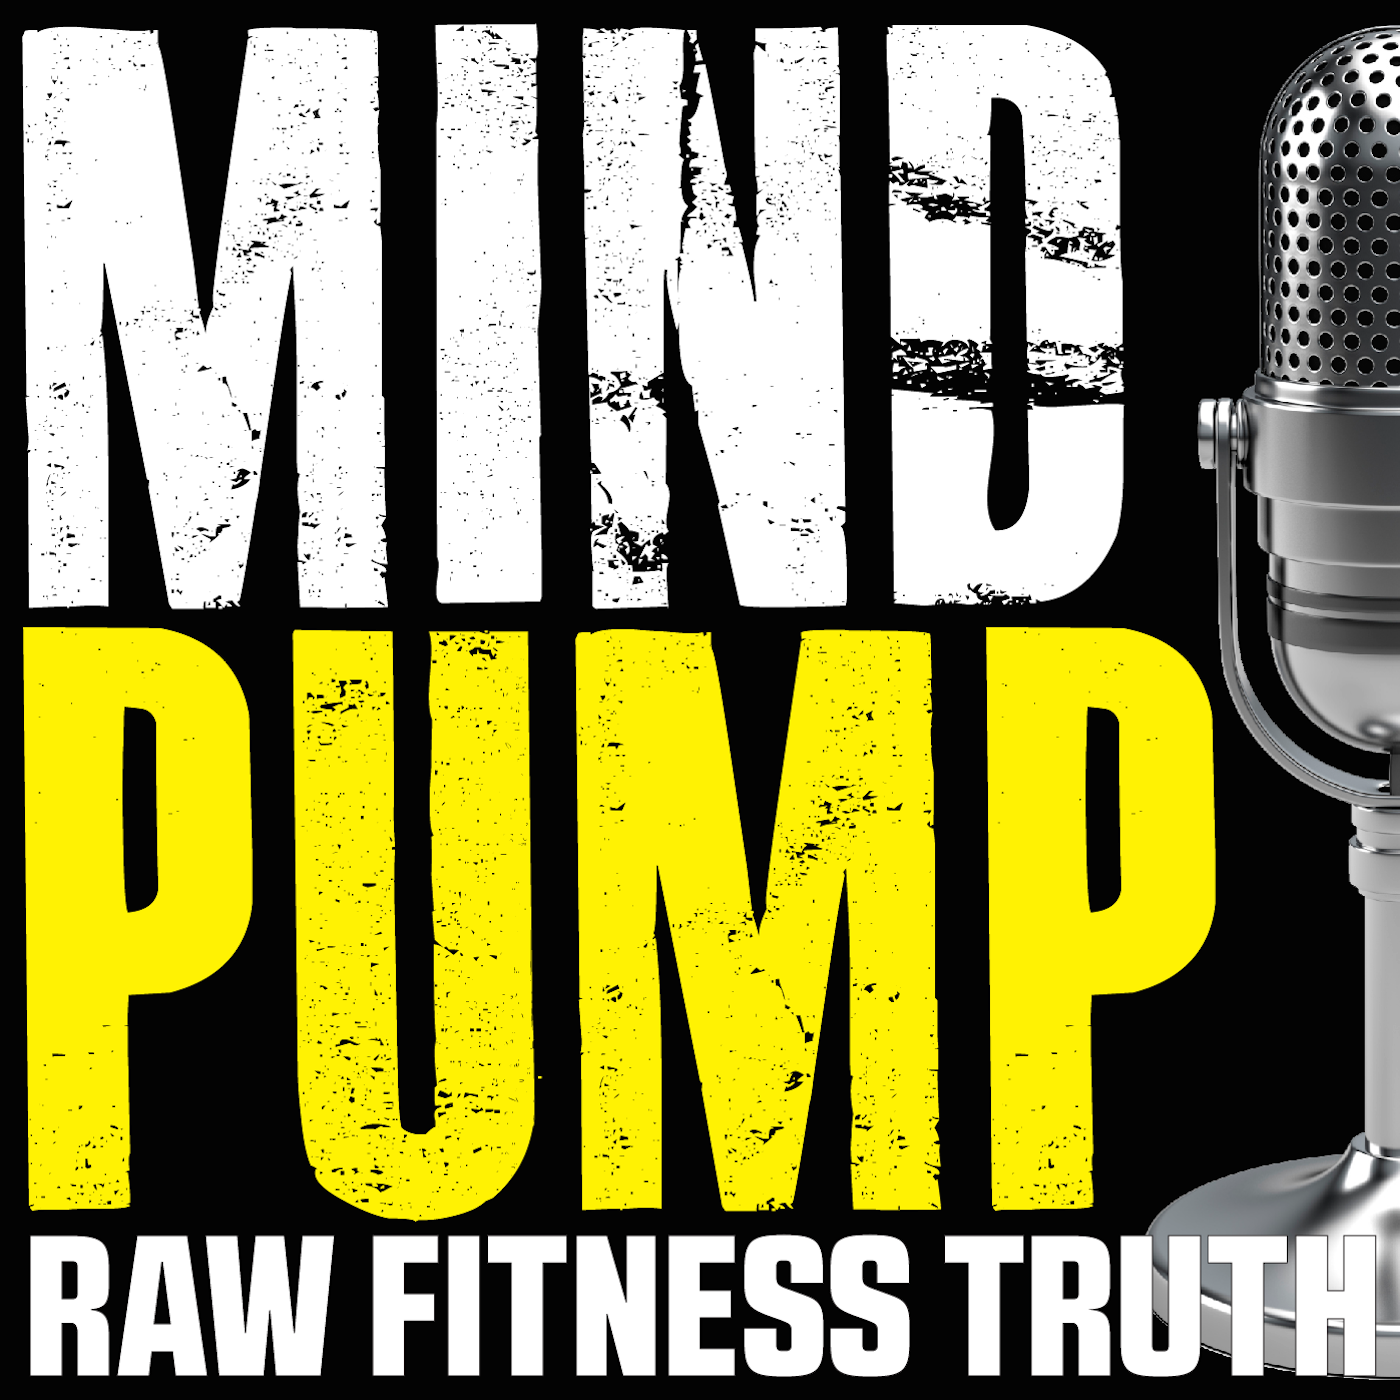 206: Pre-post workout meals, HMB, training for powerlifting & MORE